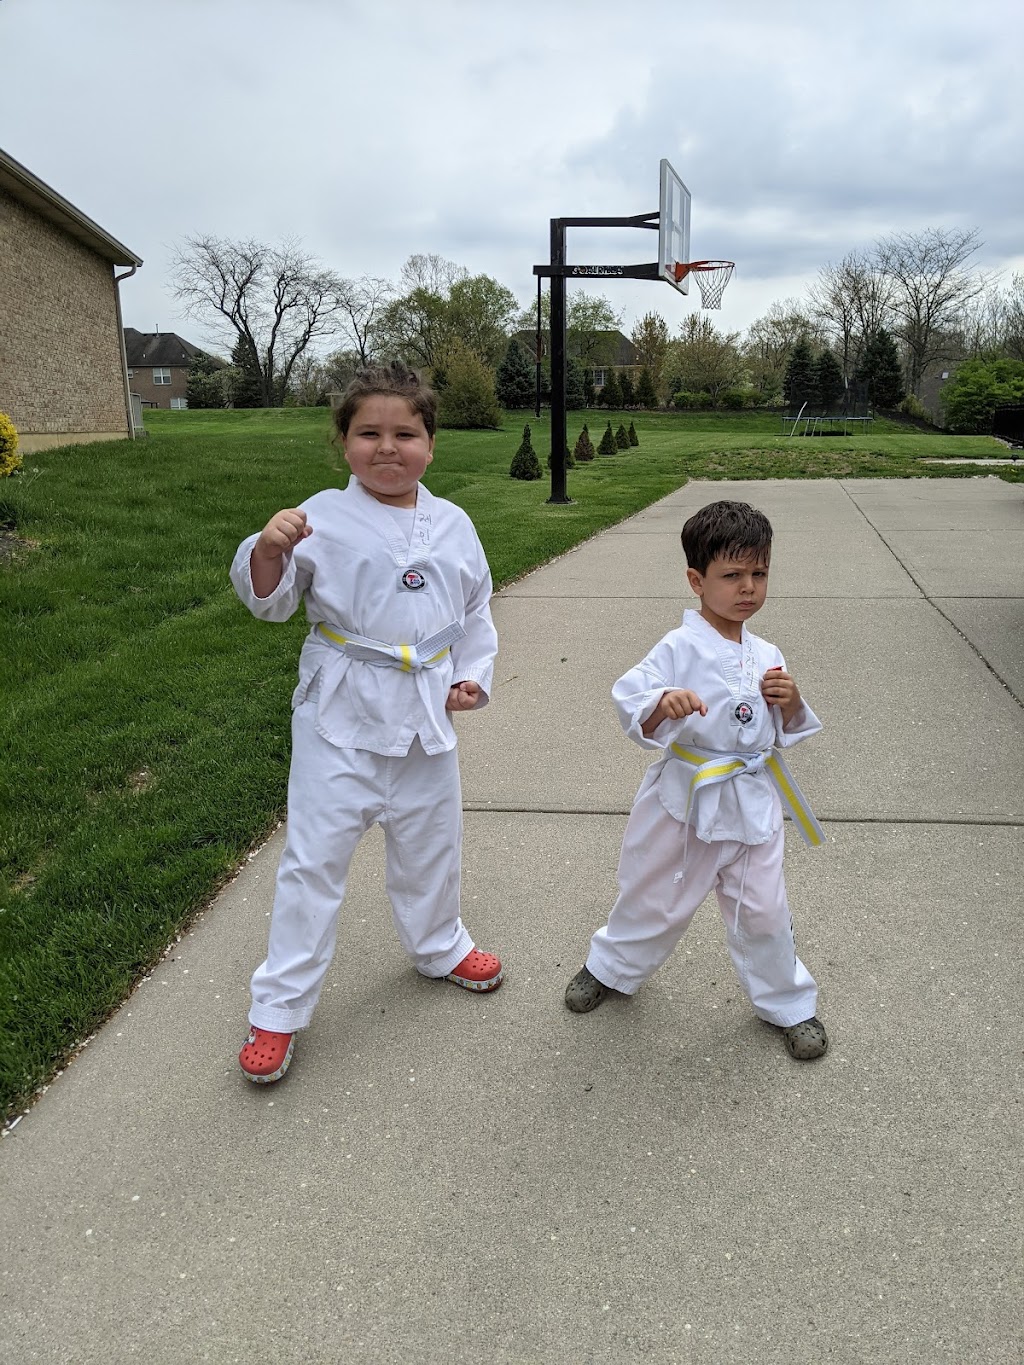 Hans White Tiger Tae Kwon Do | 8177 Princeton Glendale Rd, West Chester Township, OH 45069, USA | Phone: (513) 553-5700